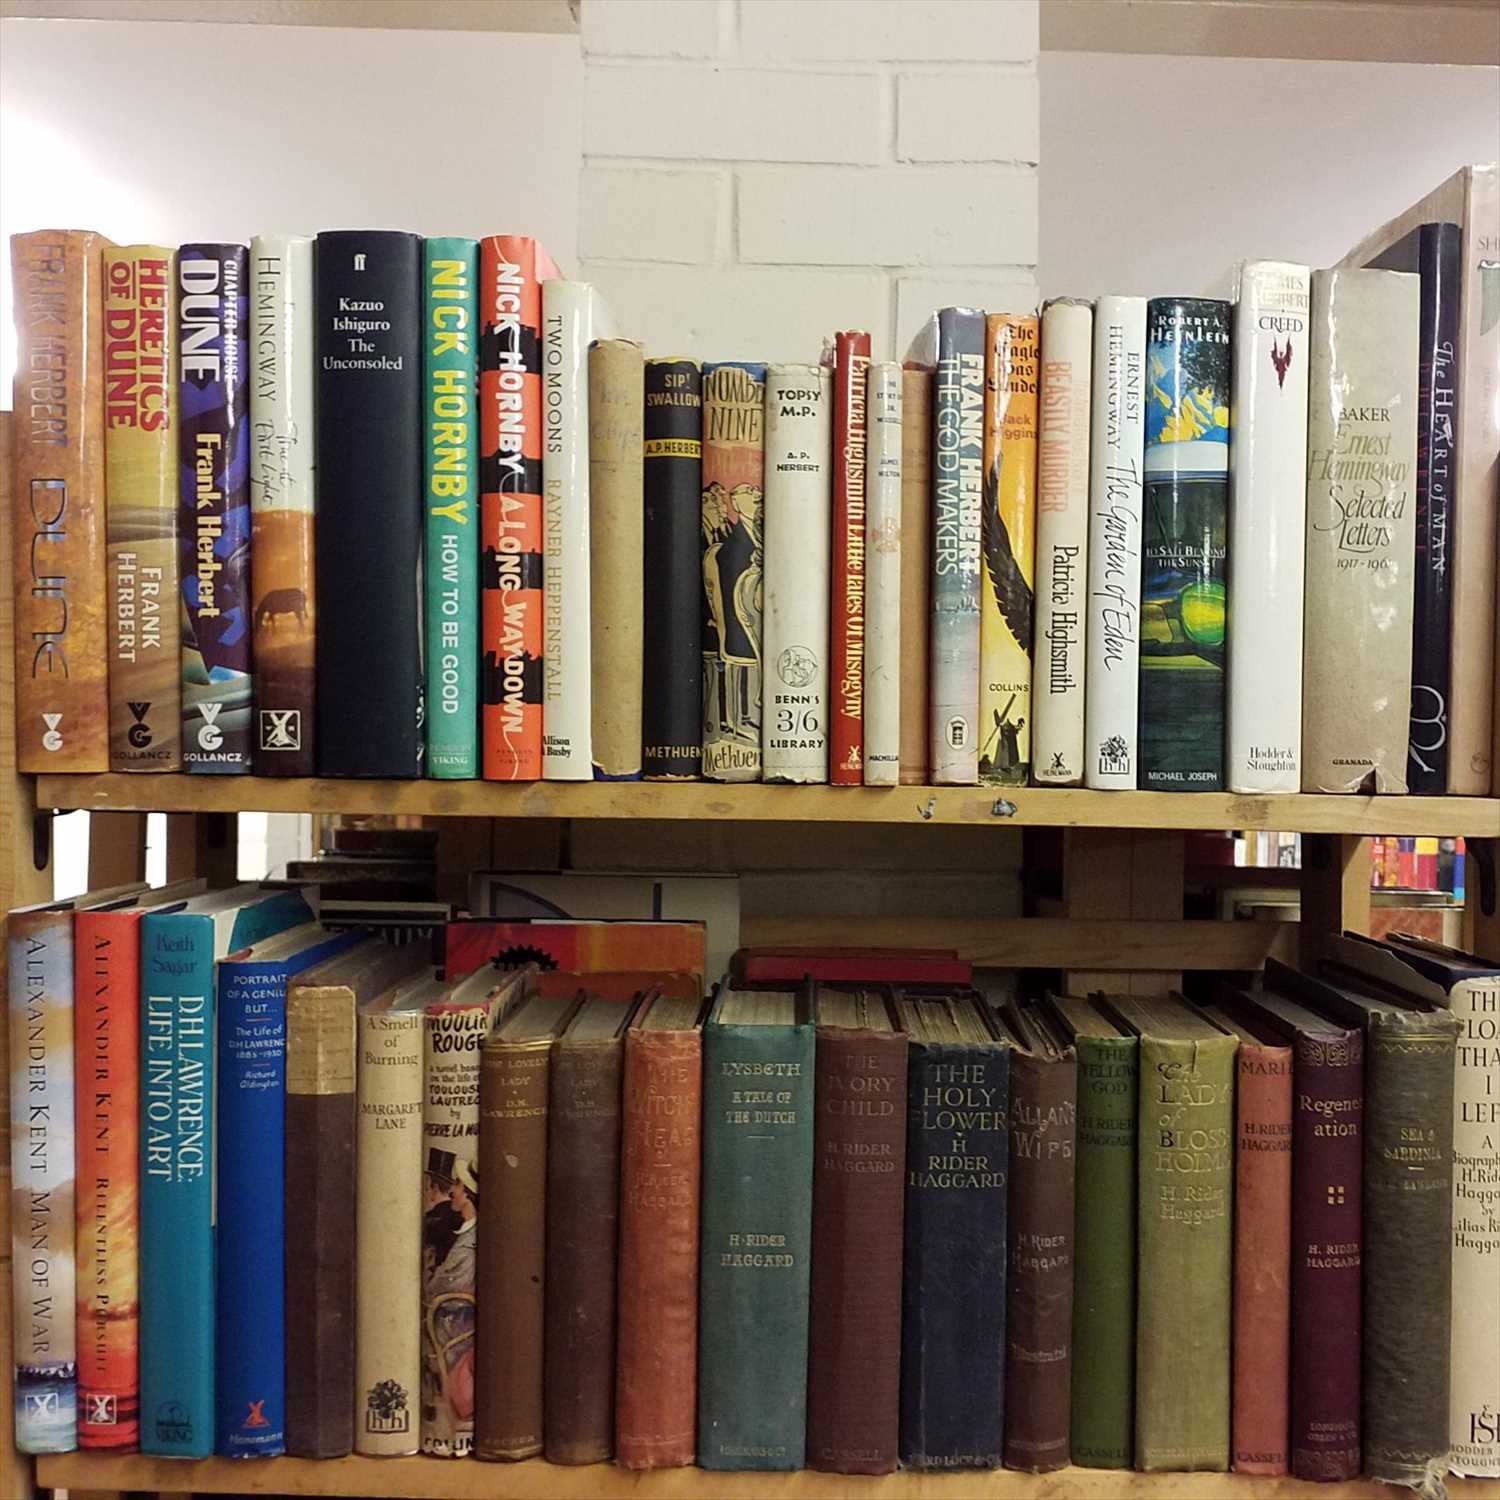 Lot 869 - Modern Fiction. A large collection of modern fiction